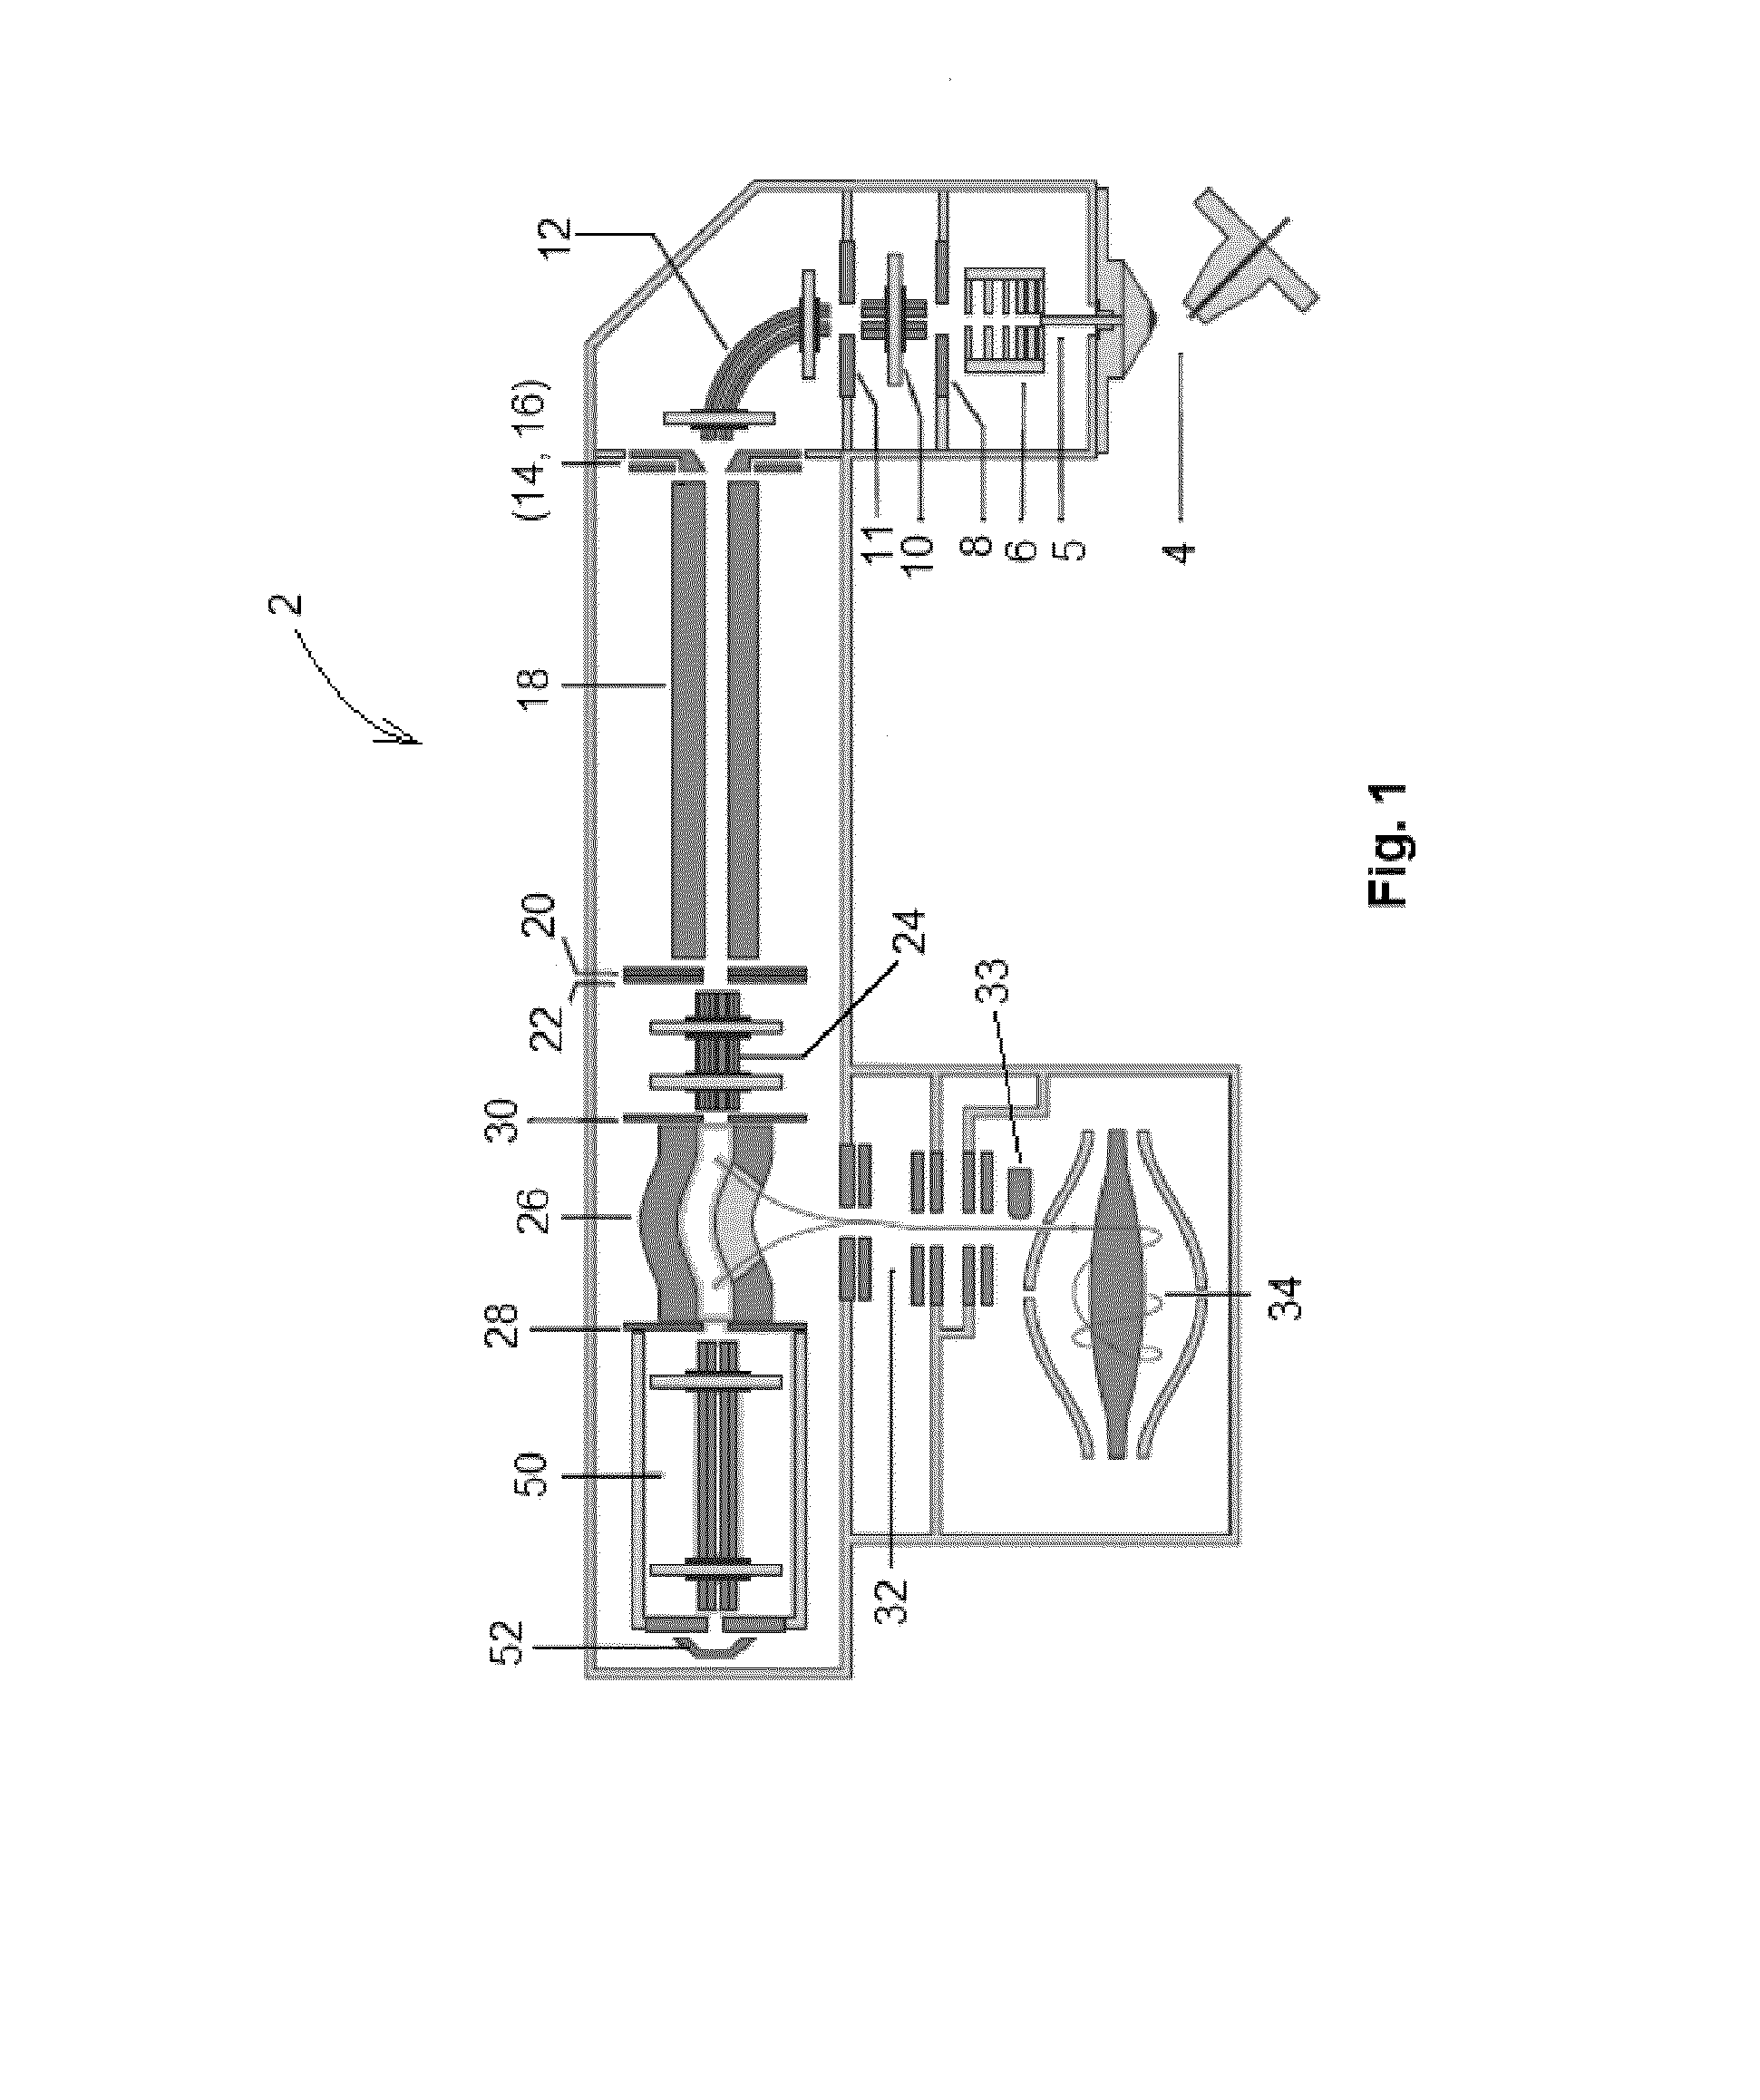 Method of Operating a Mass Filter in Mass Spectrometry